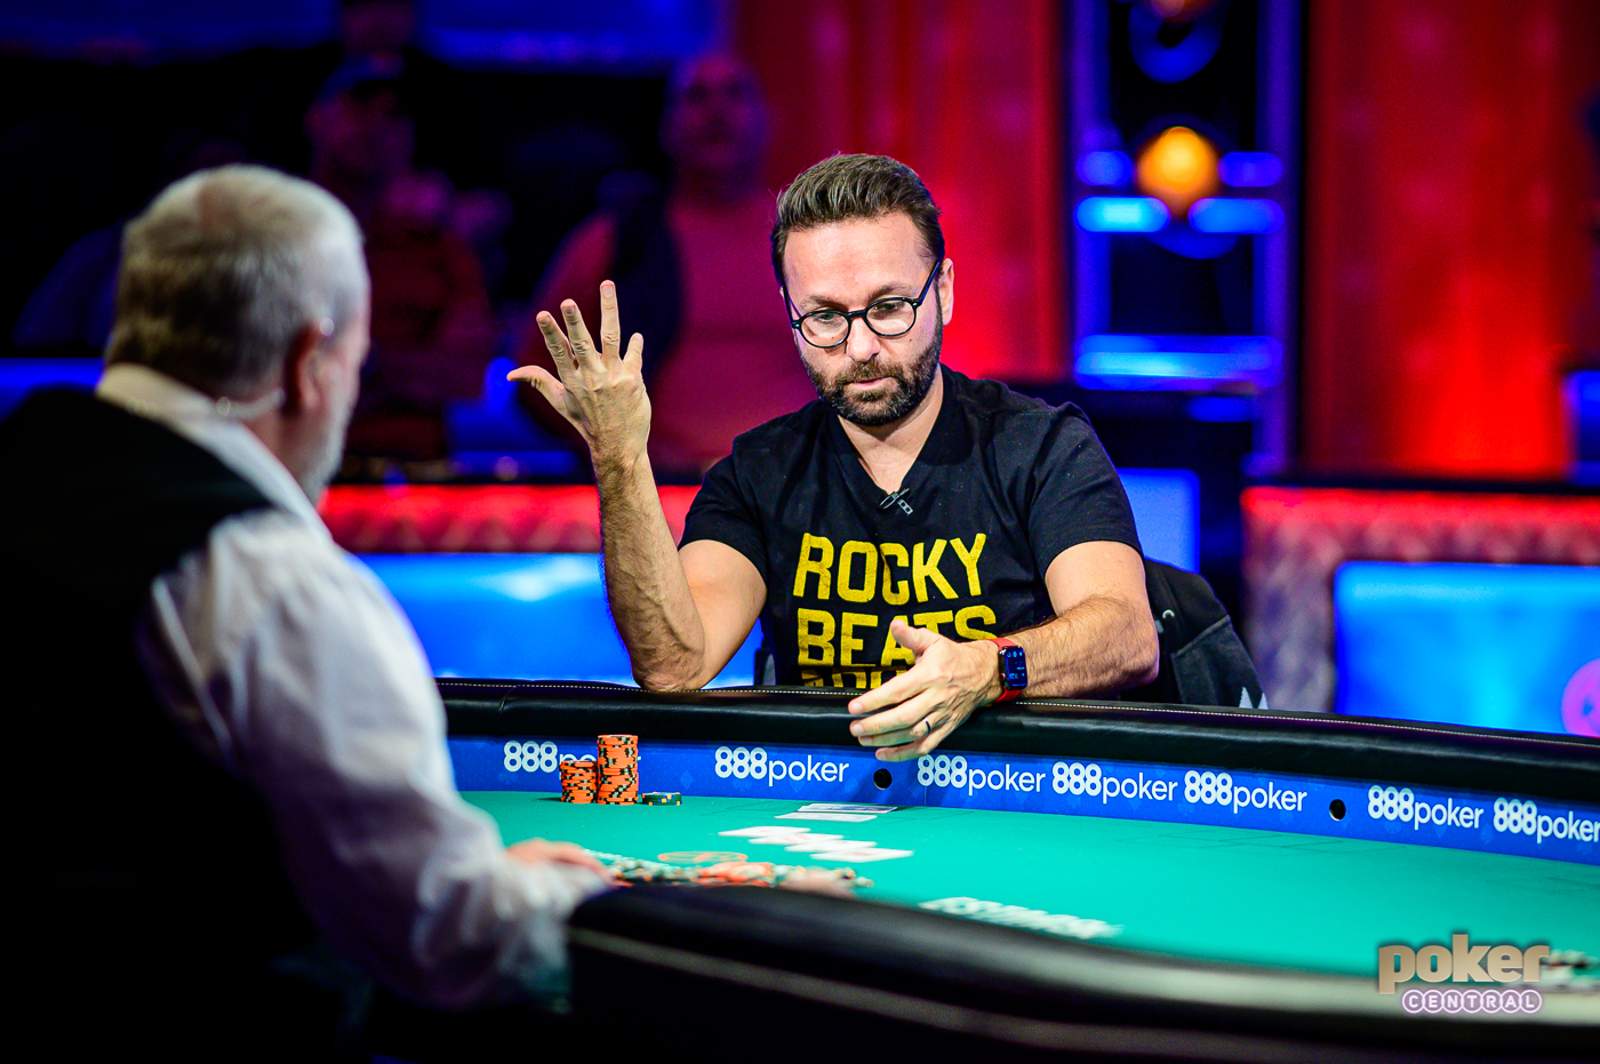 Daniel Negreanu Bittersweet After Losing Heads Up for 7th Bracelet: "The WSOP Will Only be a Success if I Win"